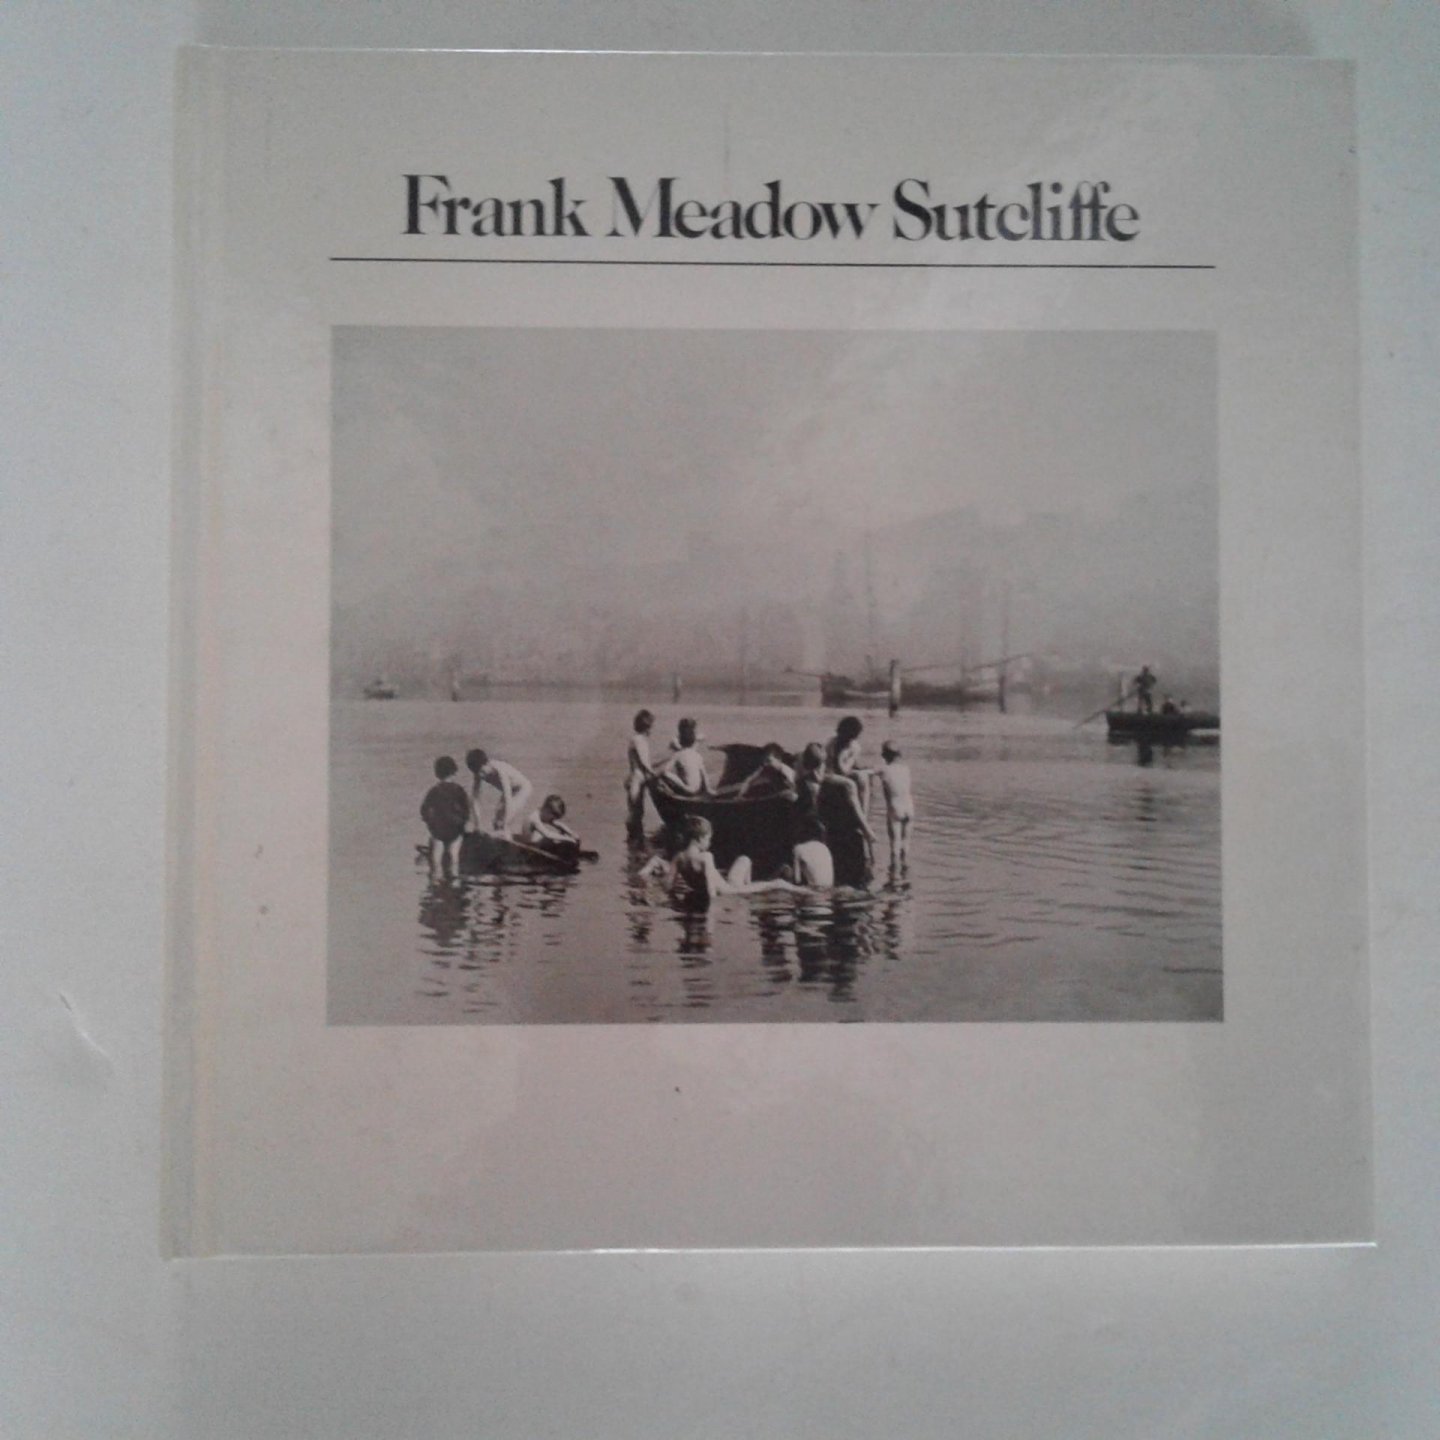 Sutcliffe, Frank Meadow - The Aperture History of Photography Series